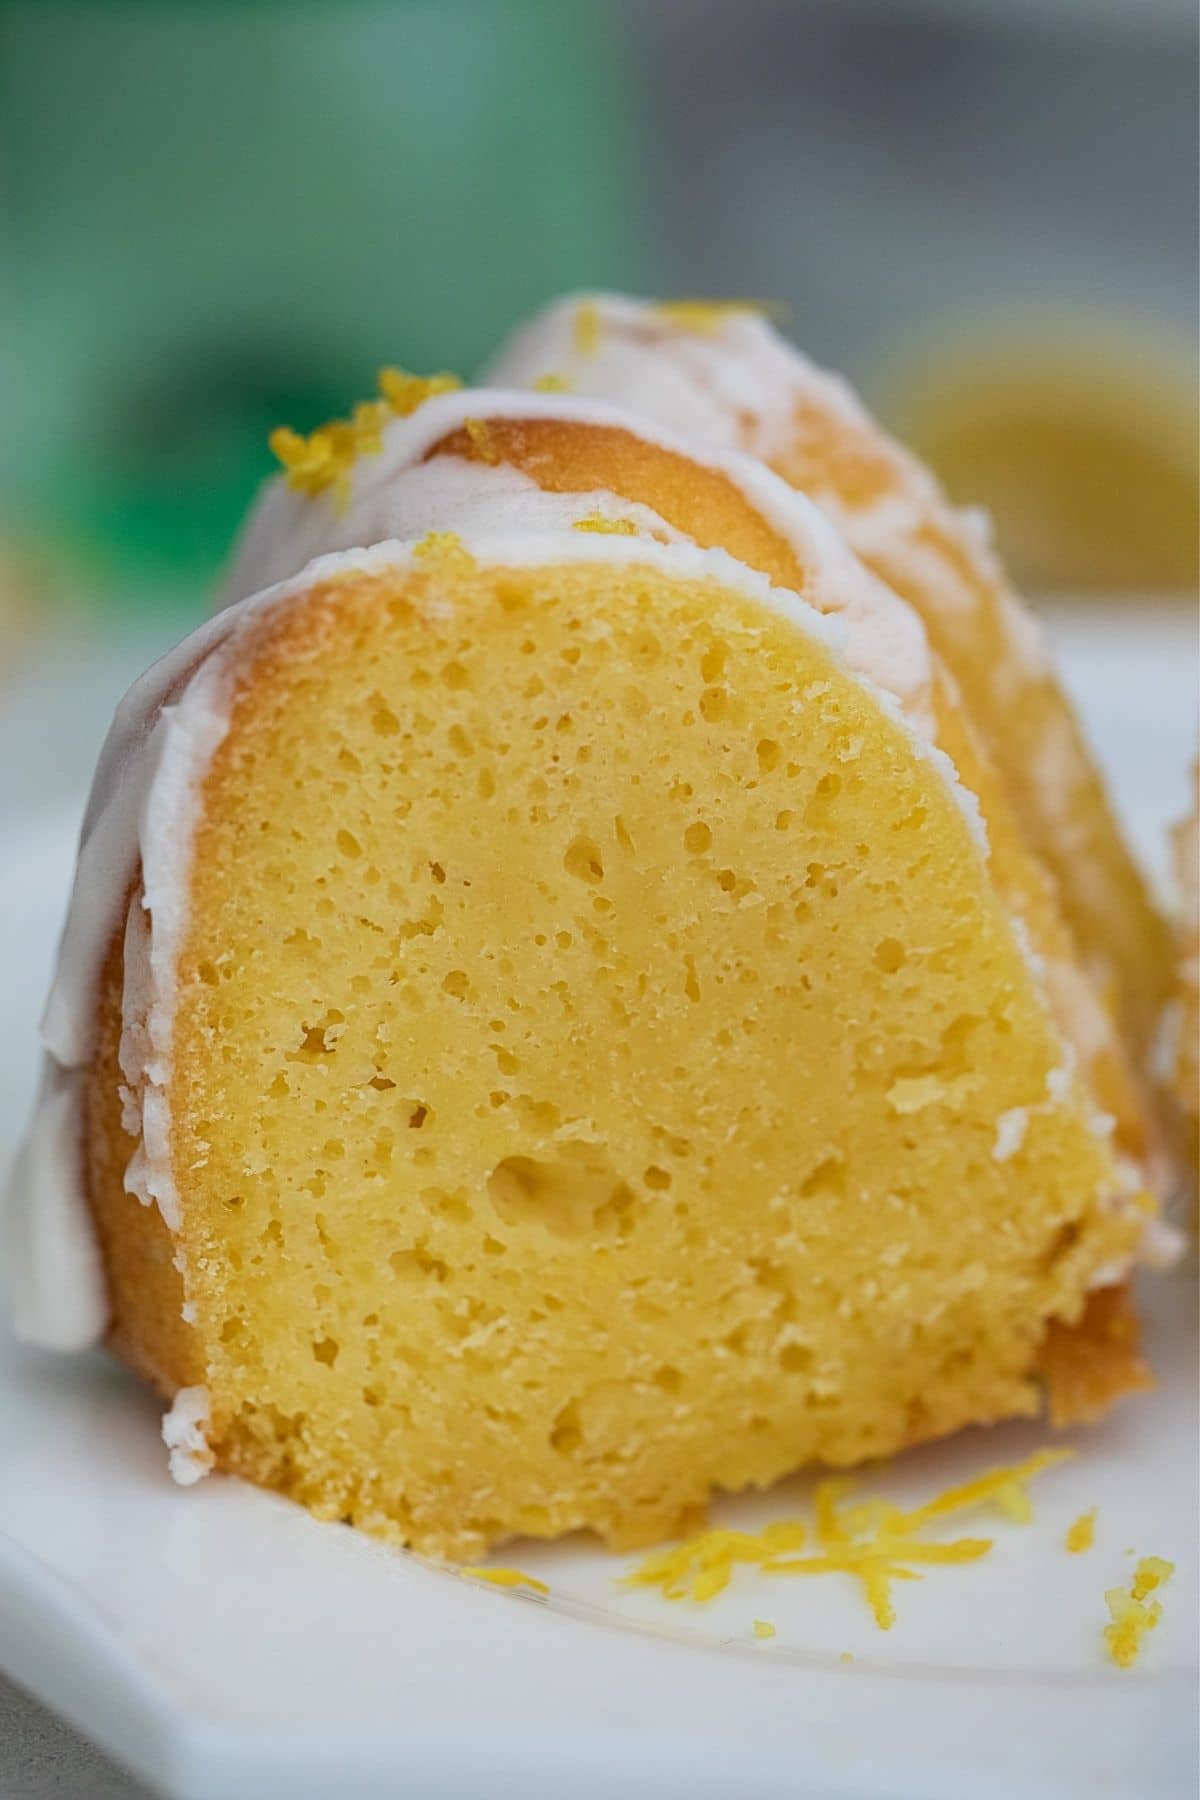 Slices of cake on plate showing moist yellow cake 